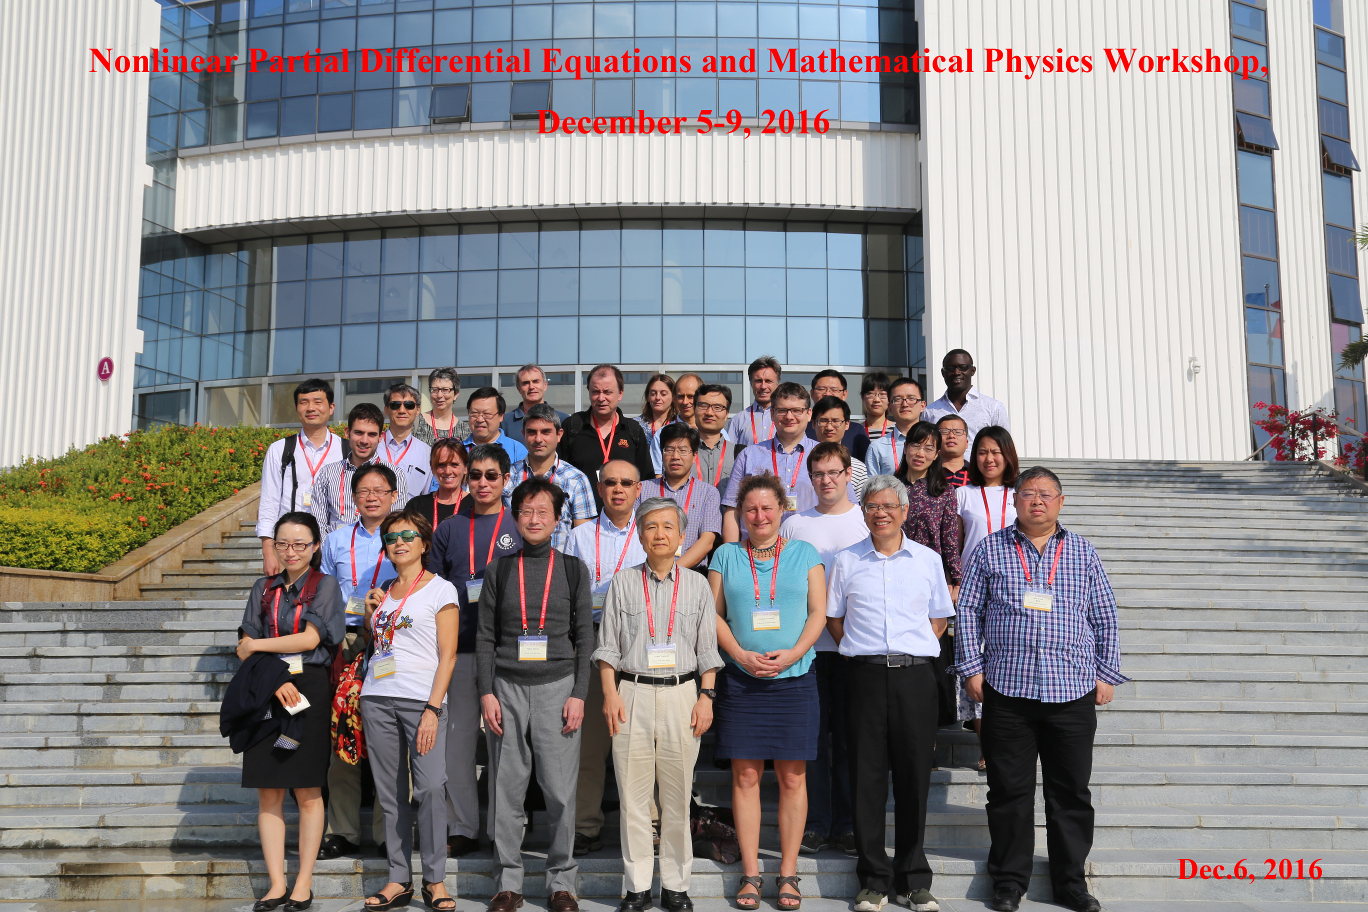 Group Photo for the Nonlinear Partial Differential Equations and Mathematical Physics Workshop